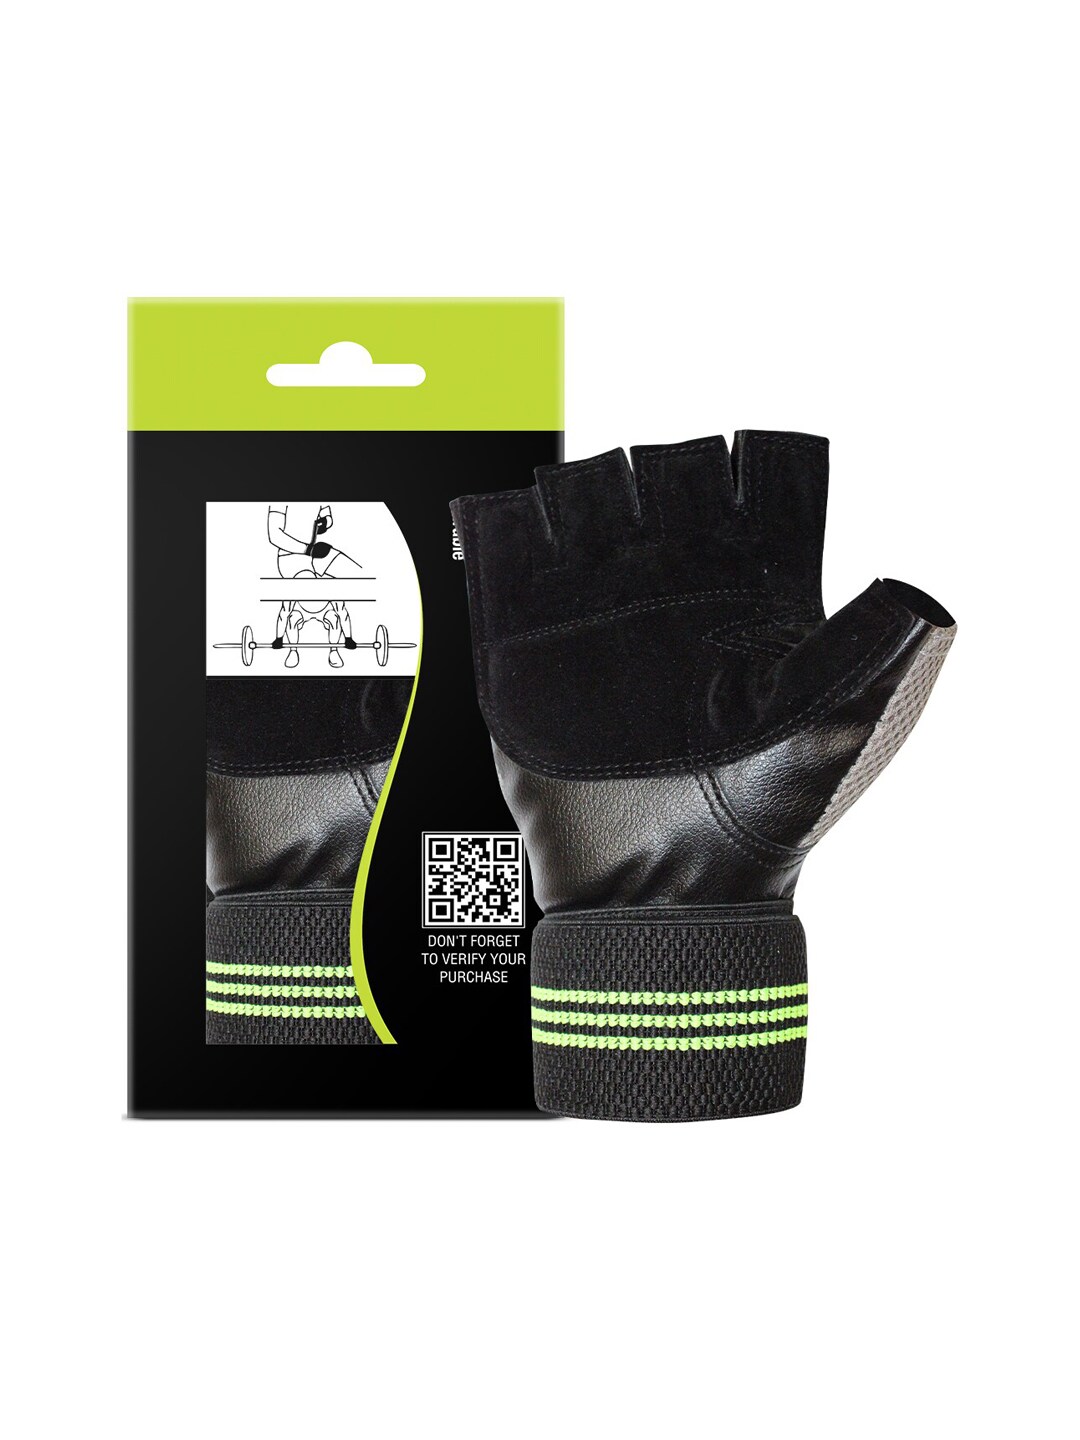 MUSCLEXP Chroma-Fit Multi Workout Gym Gloves Sport Accessories Price in India